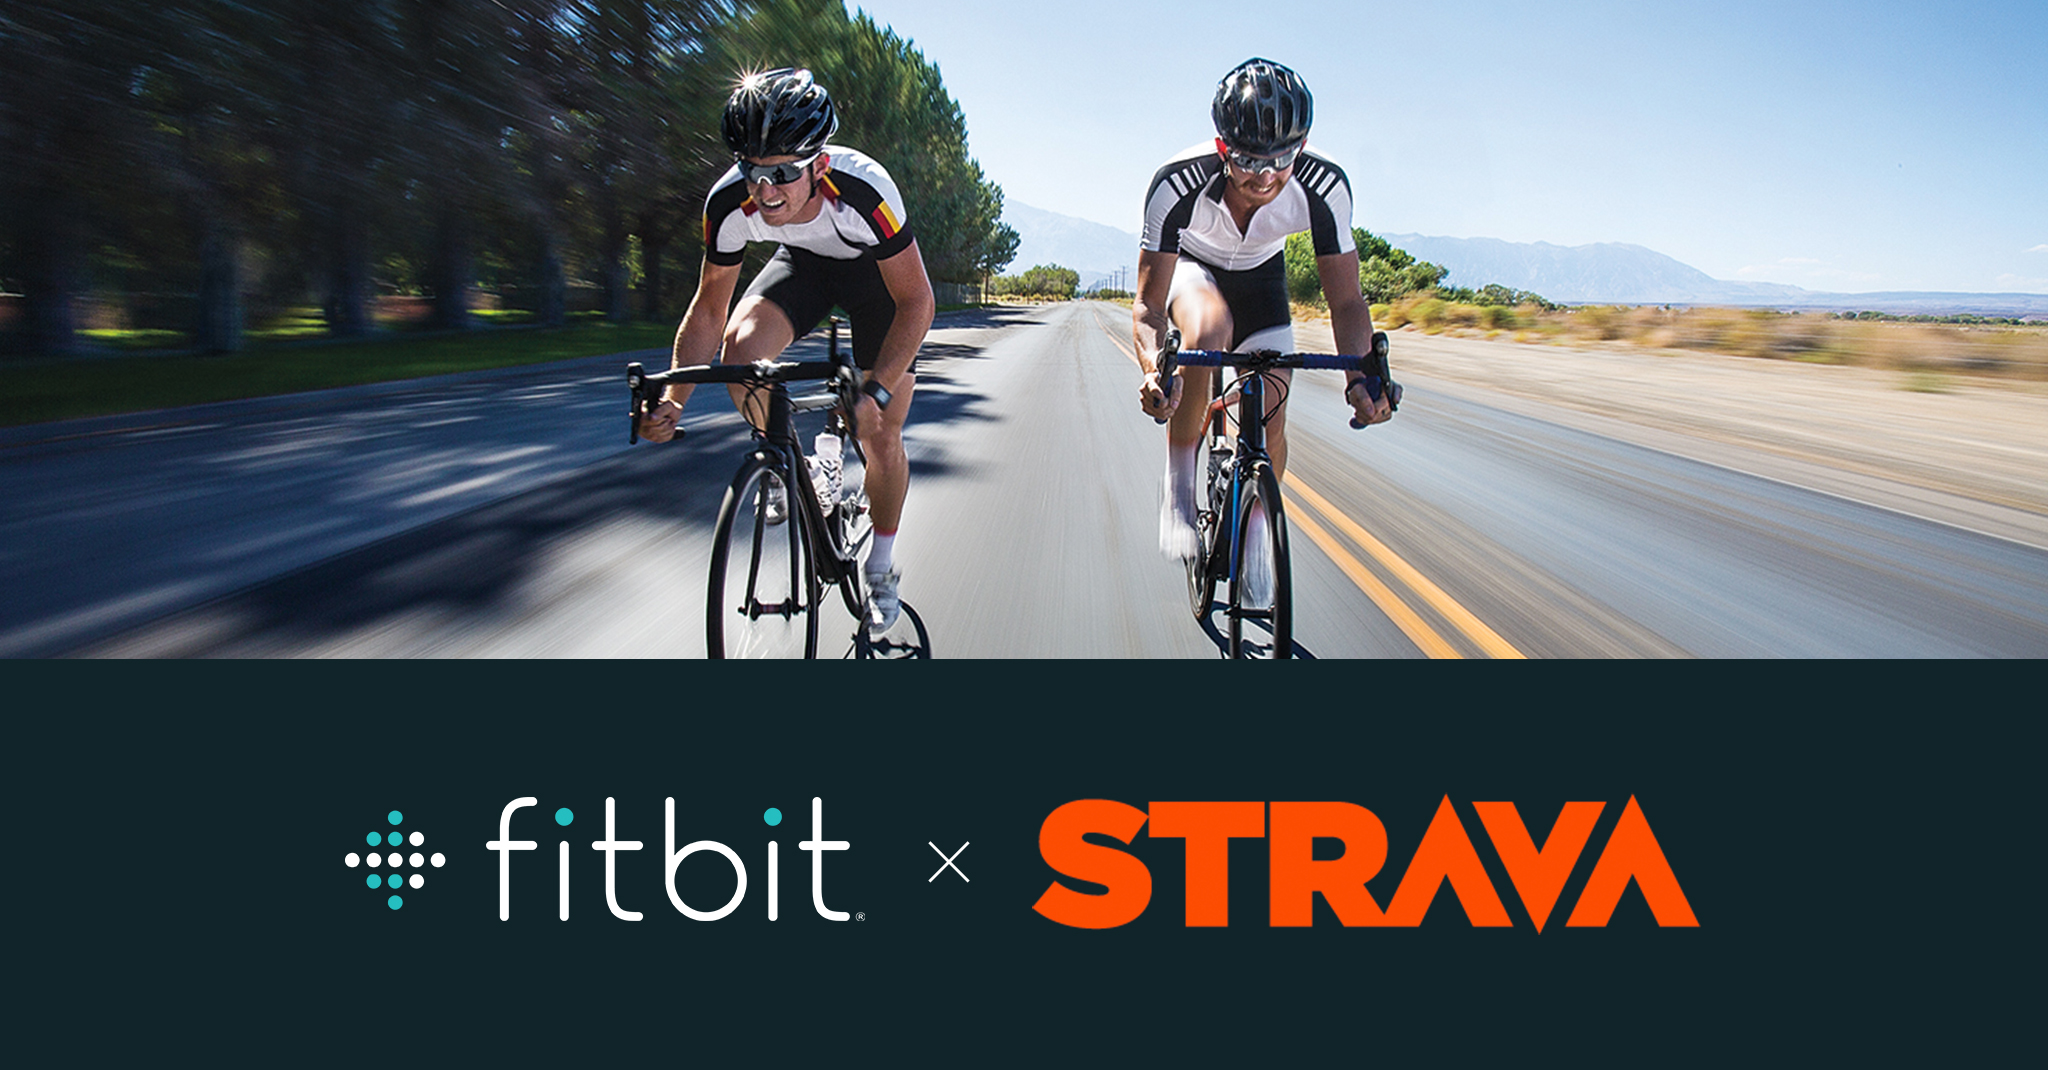 You can now connect your Fitbit account to Strava!